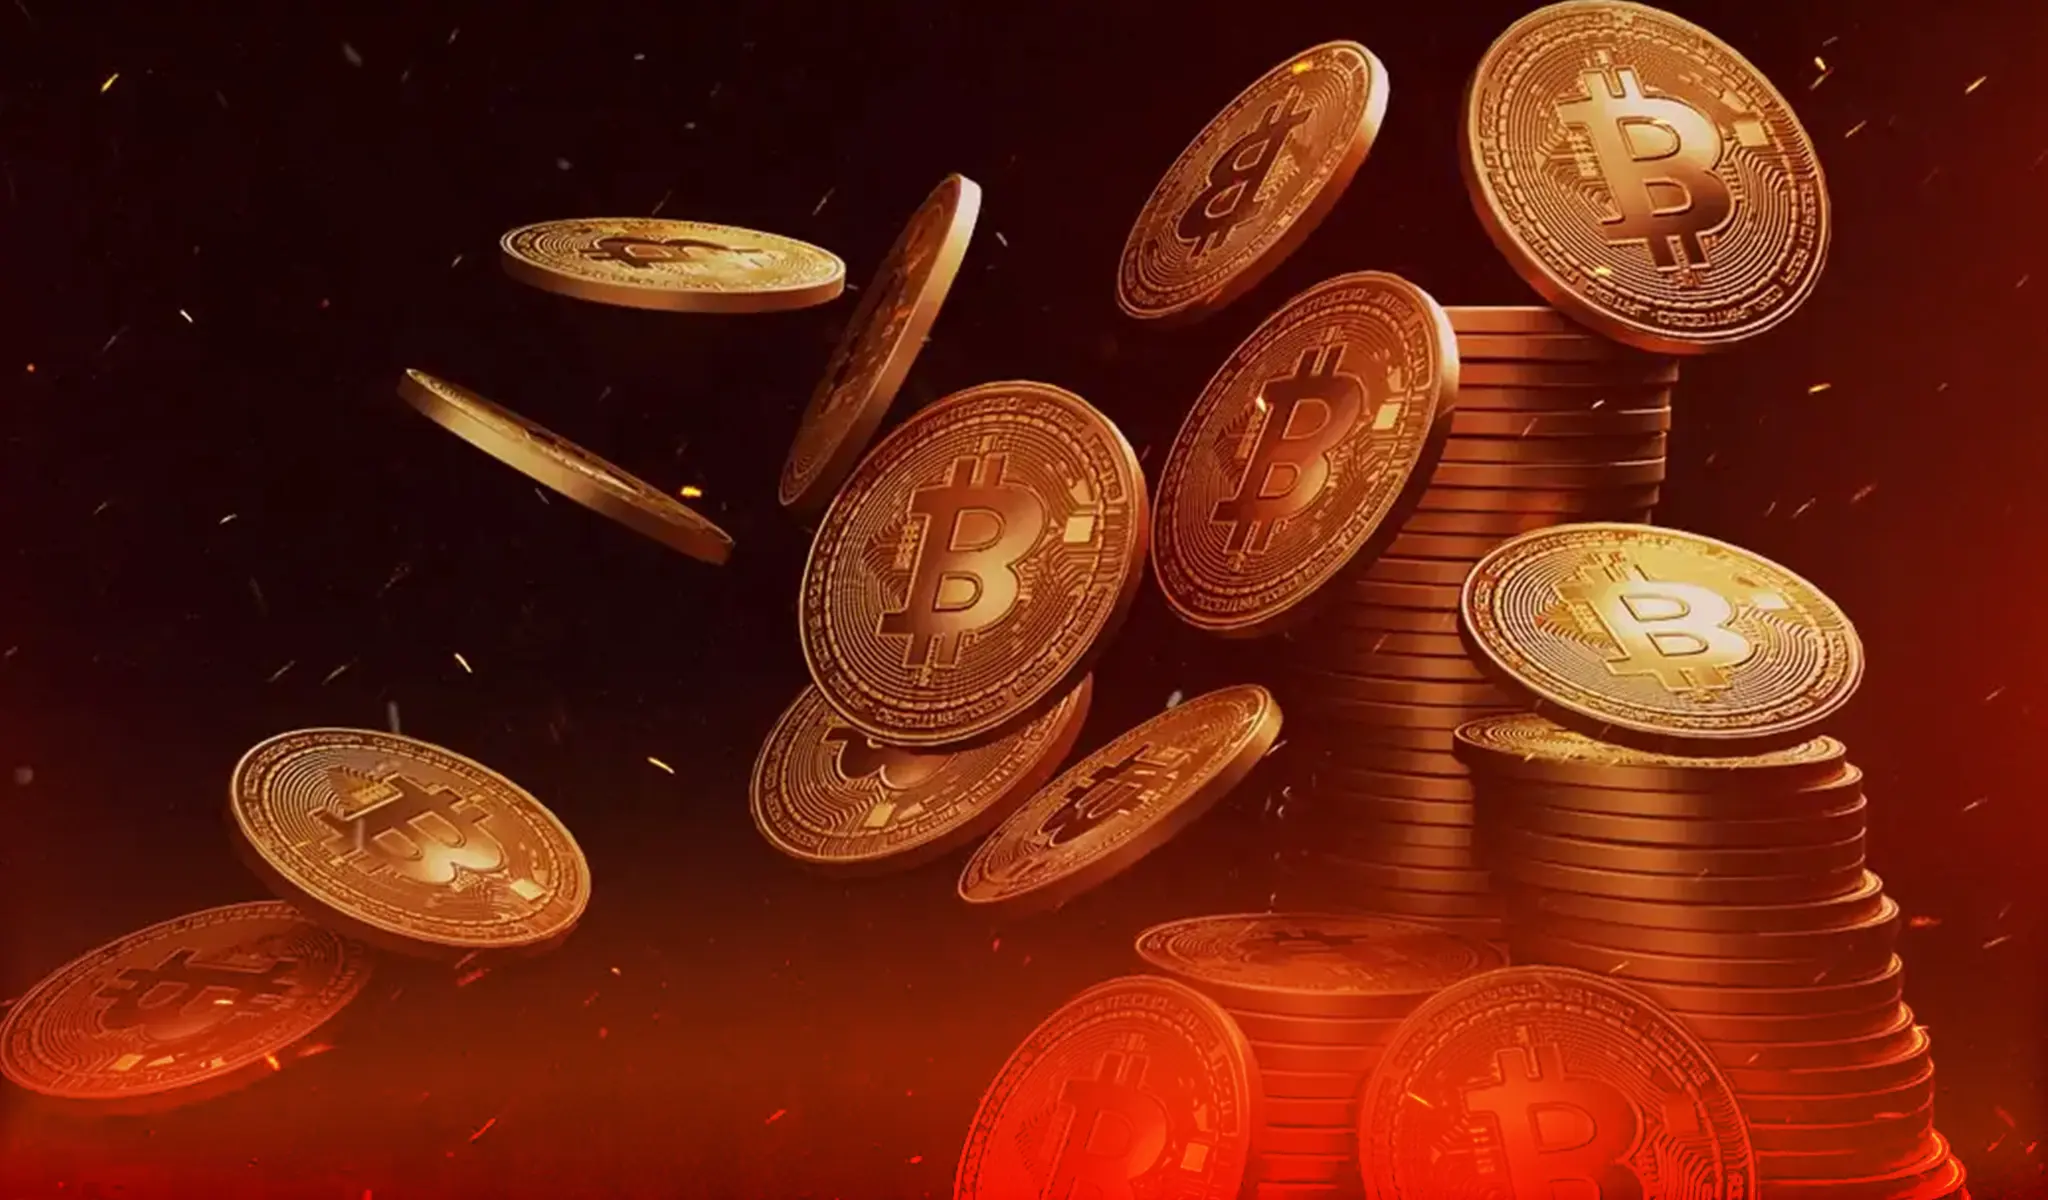 Bitcoin coins falling with a stack on a fiery red and black background.